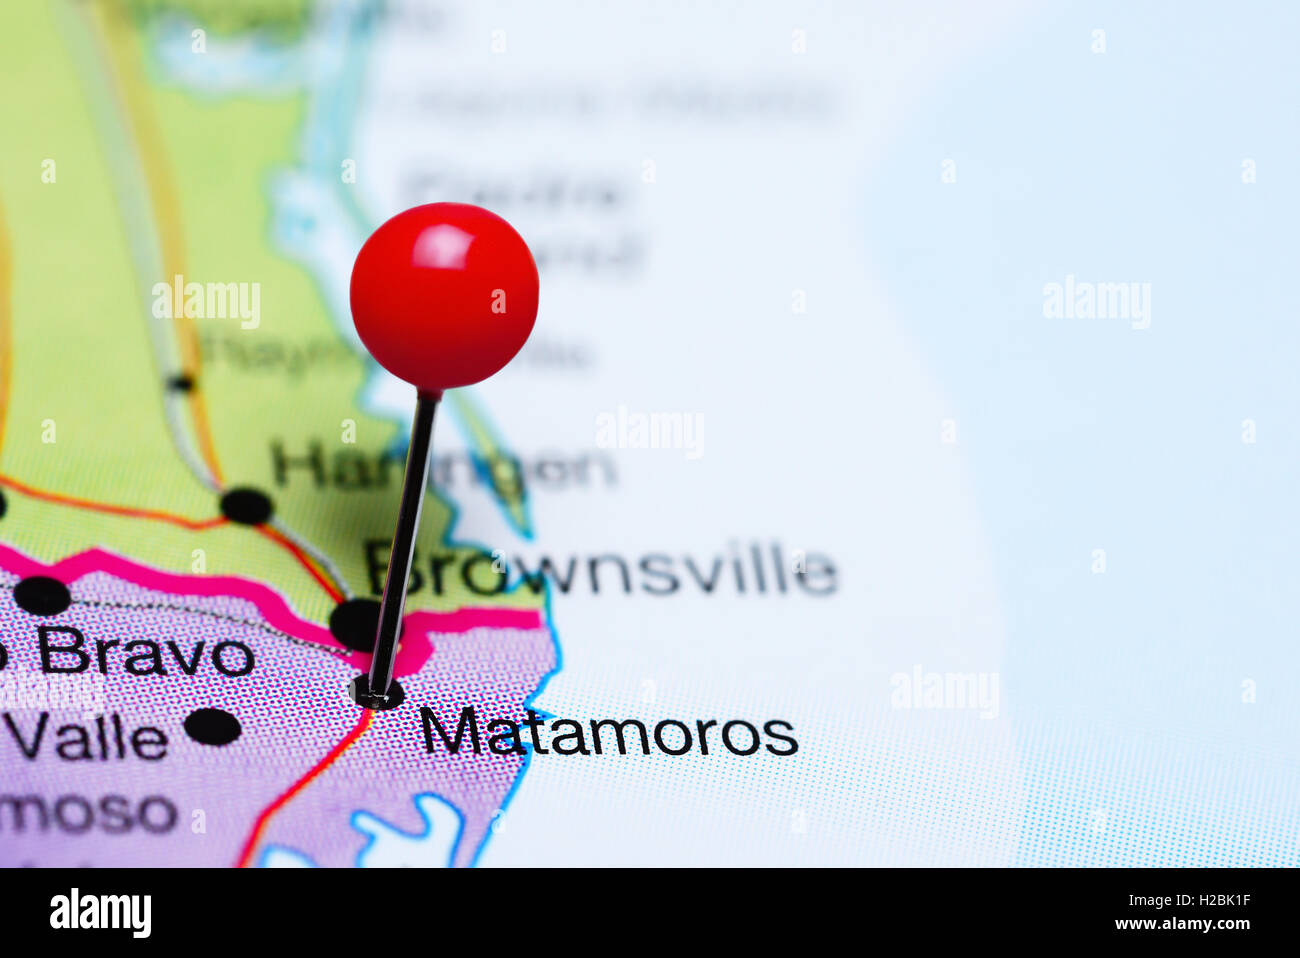 Matamoros pinned on a map of Mexico Stock Photo